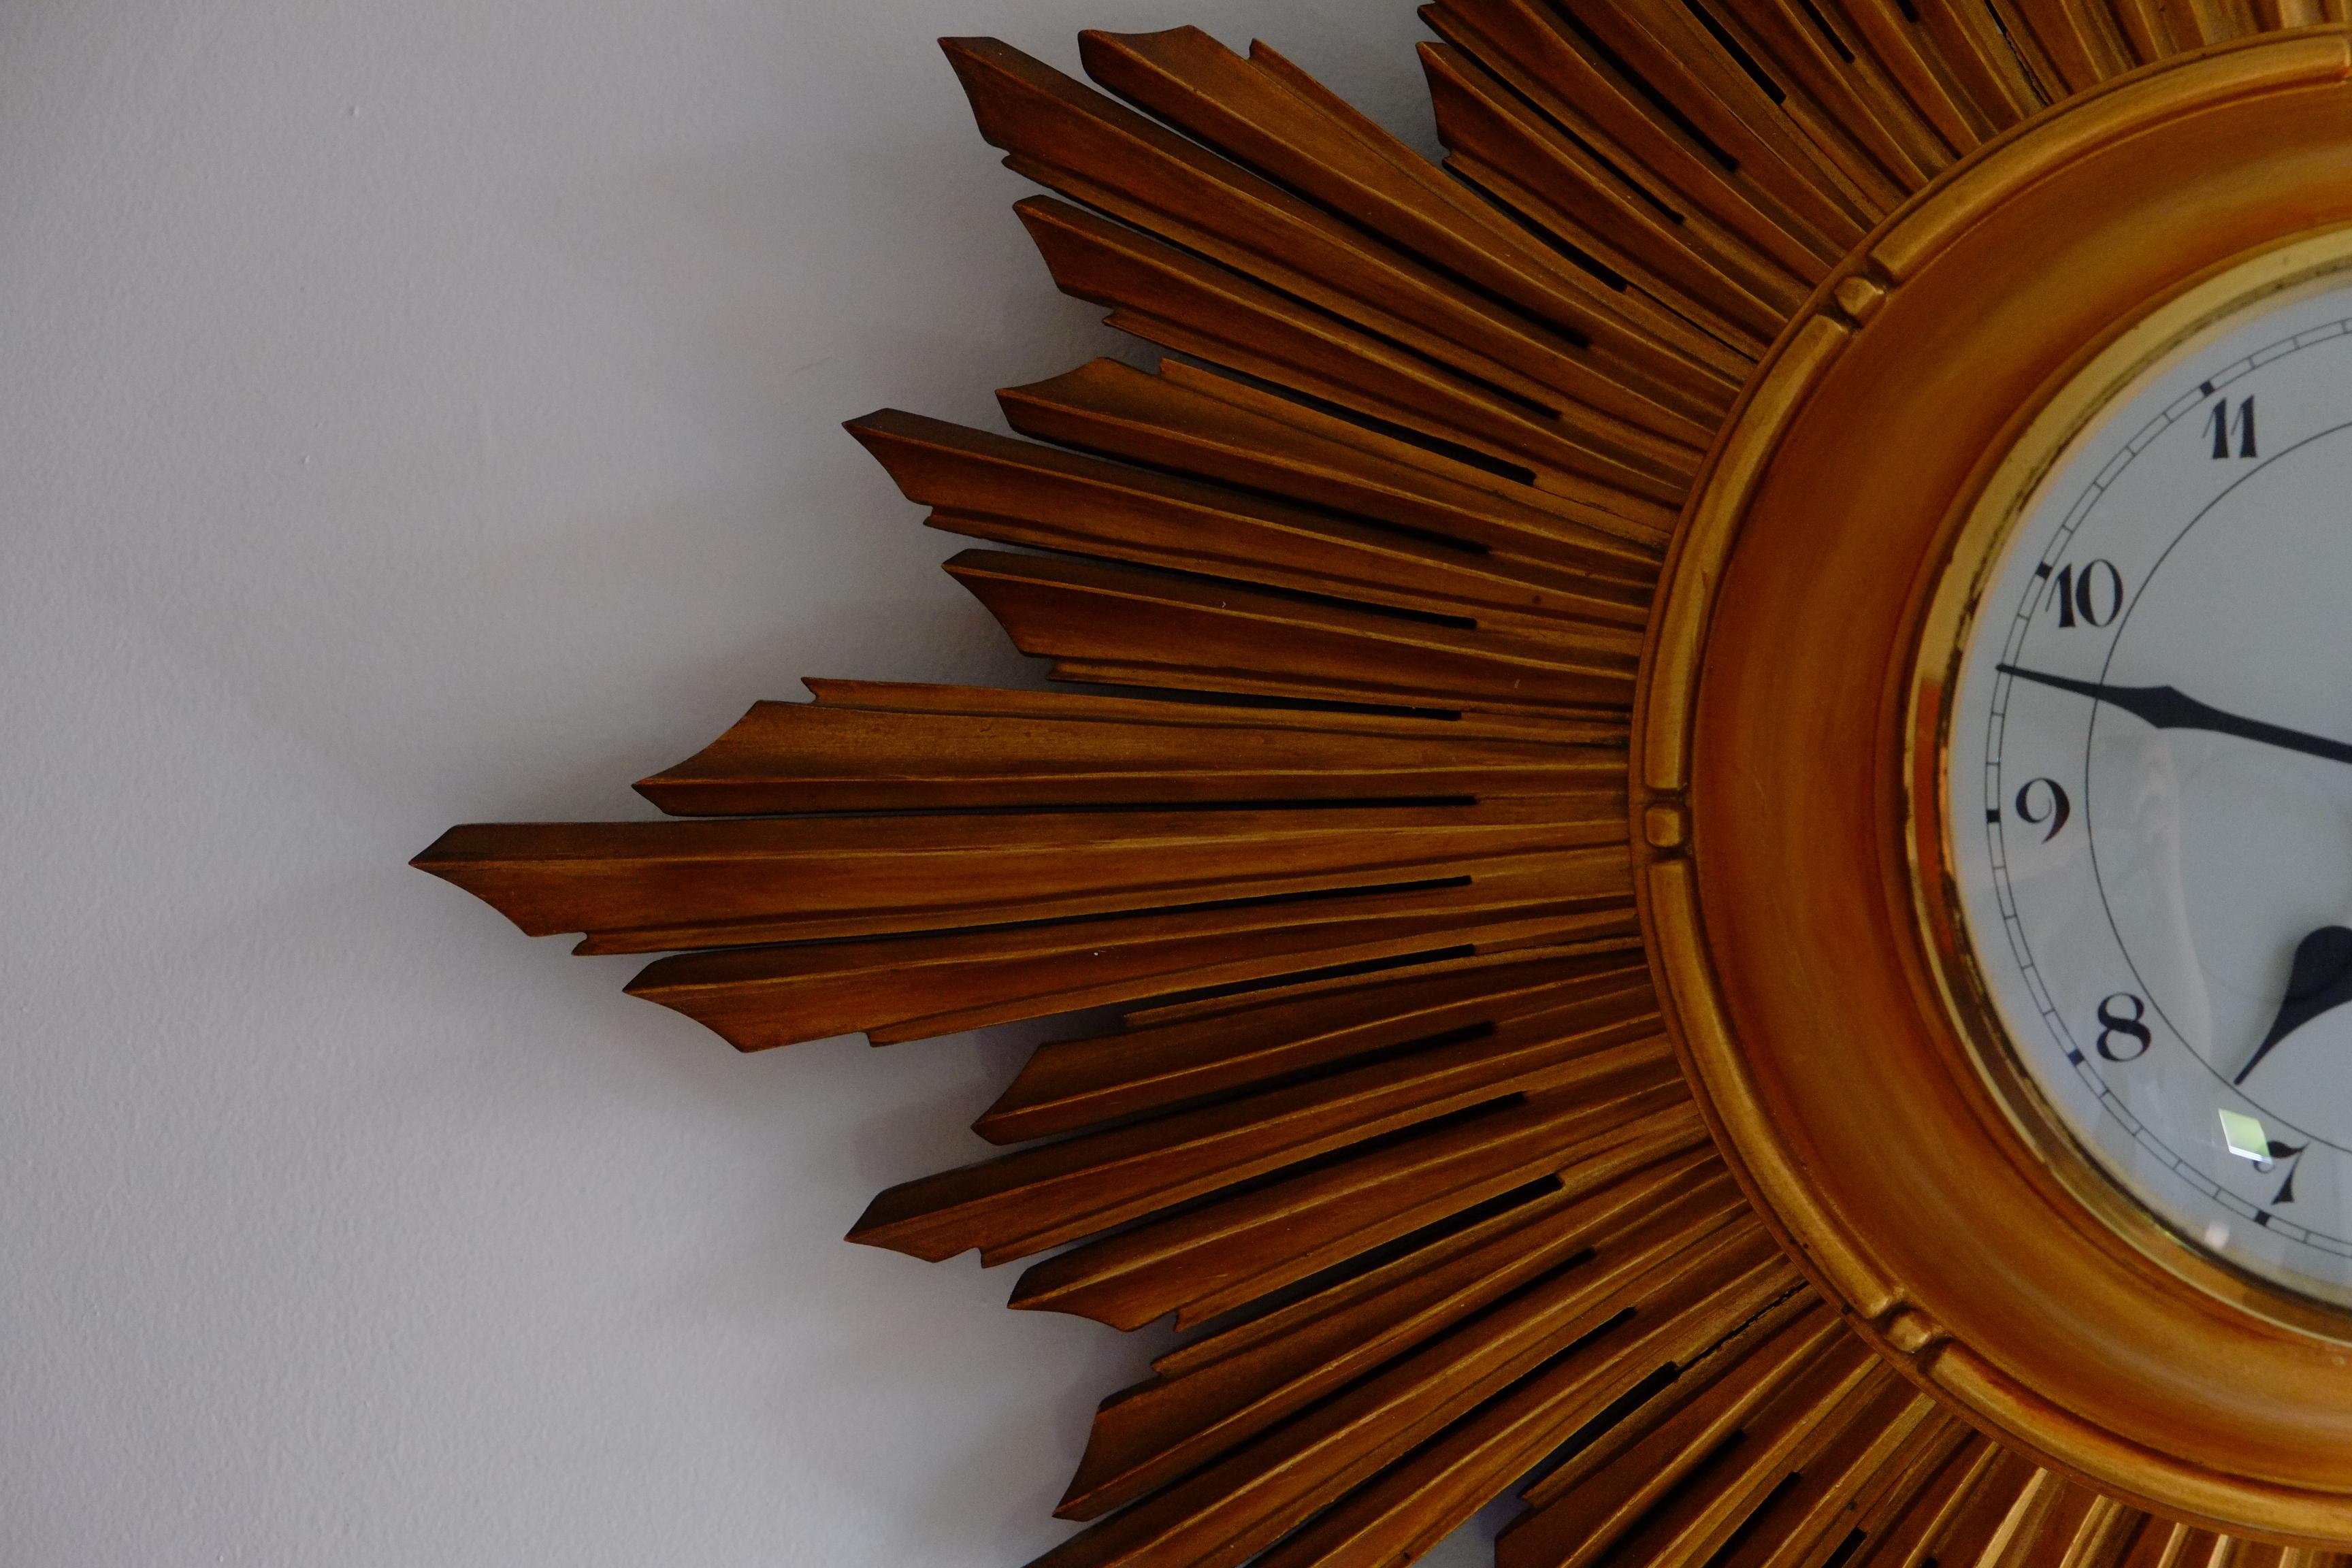 Carved Rare Gilt Wood Smiths Gold Sunburst Wall Clock. Made in England For Sale